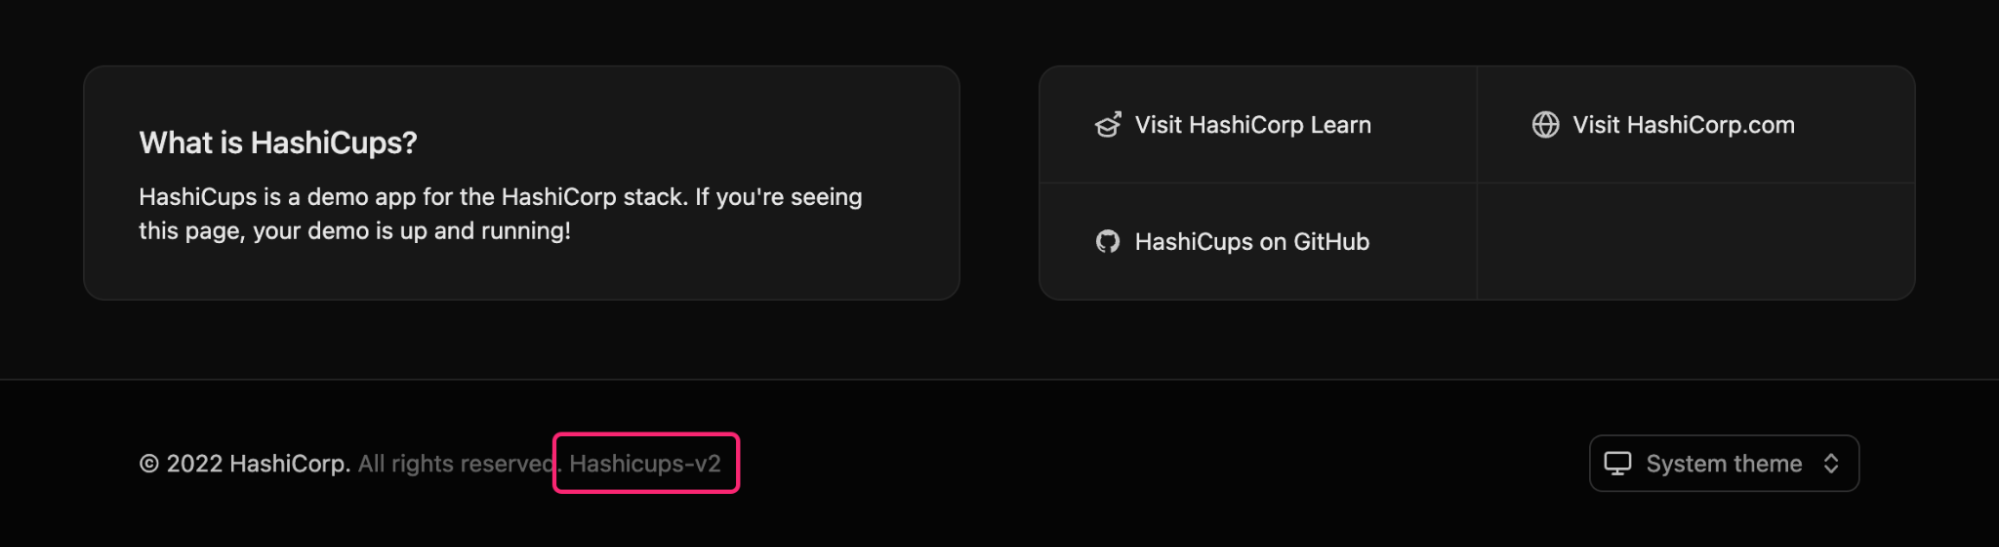 The HashiCups frontend will show "Hashicups-v2" in the footer 30% of the time
due to the service splitter.